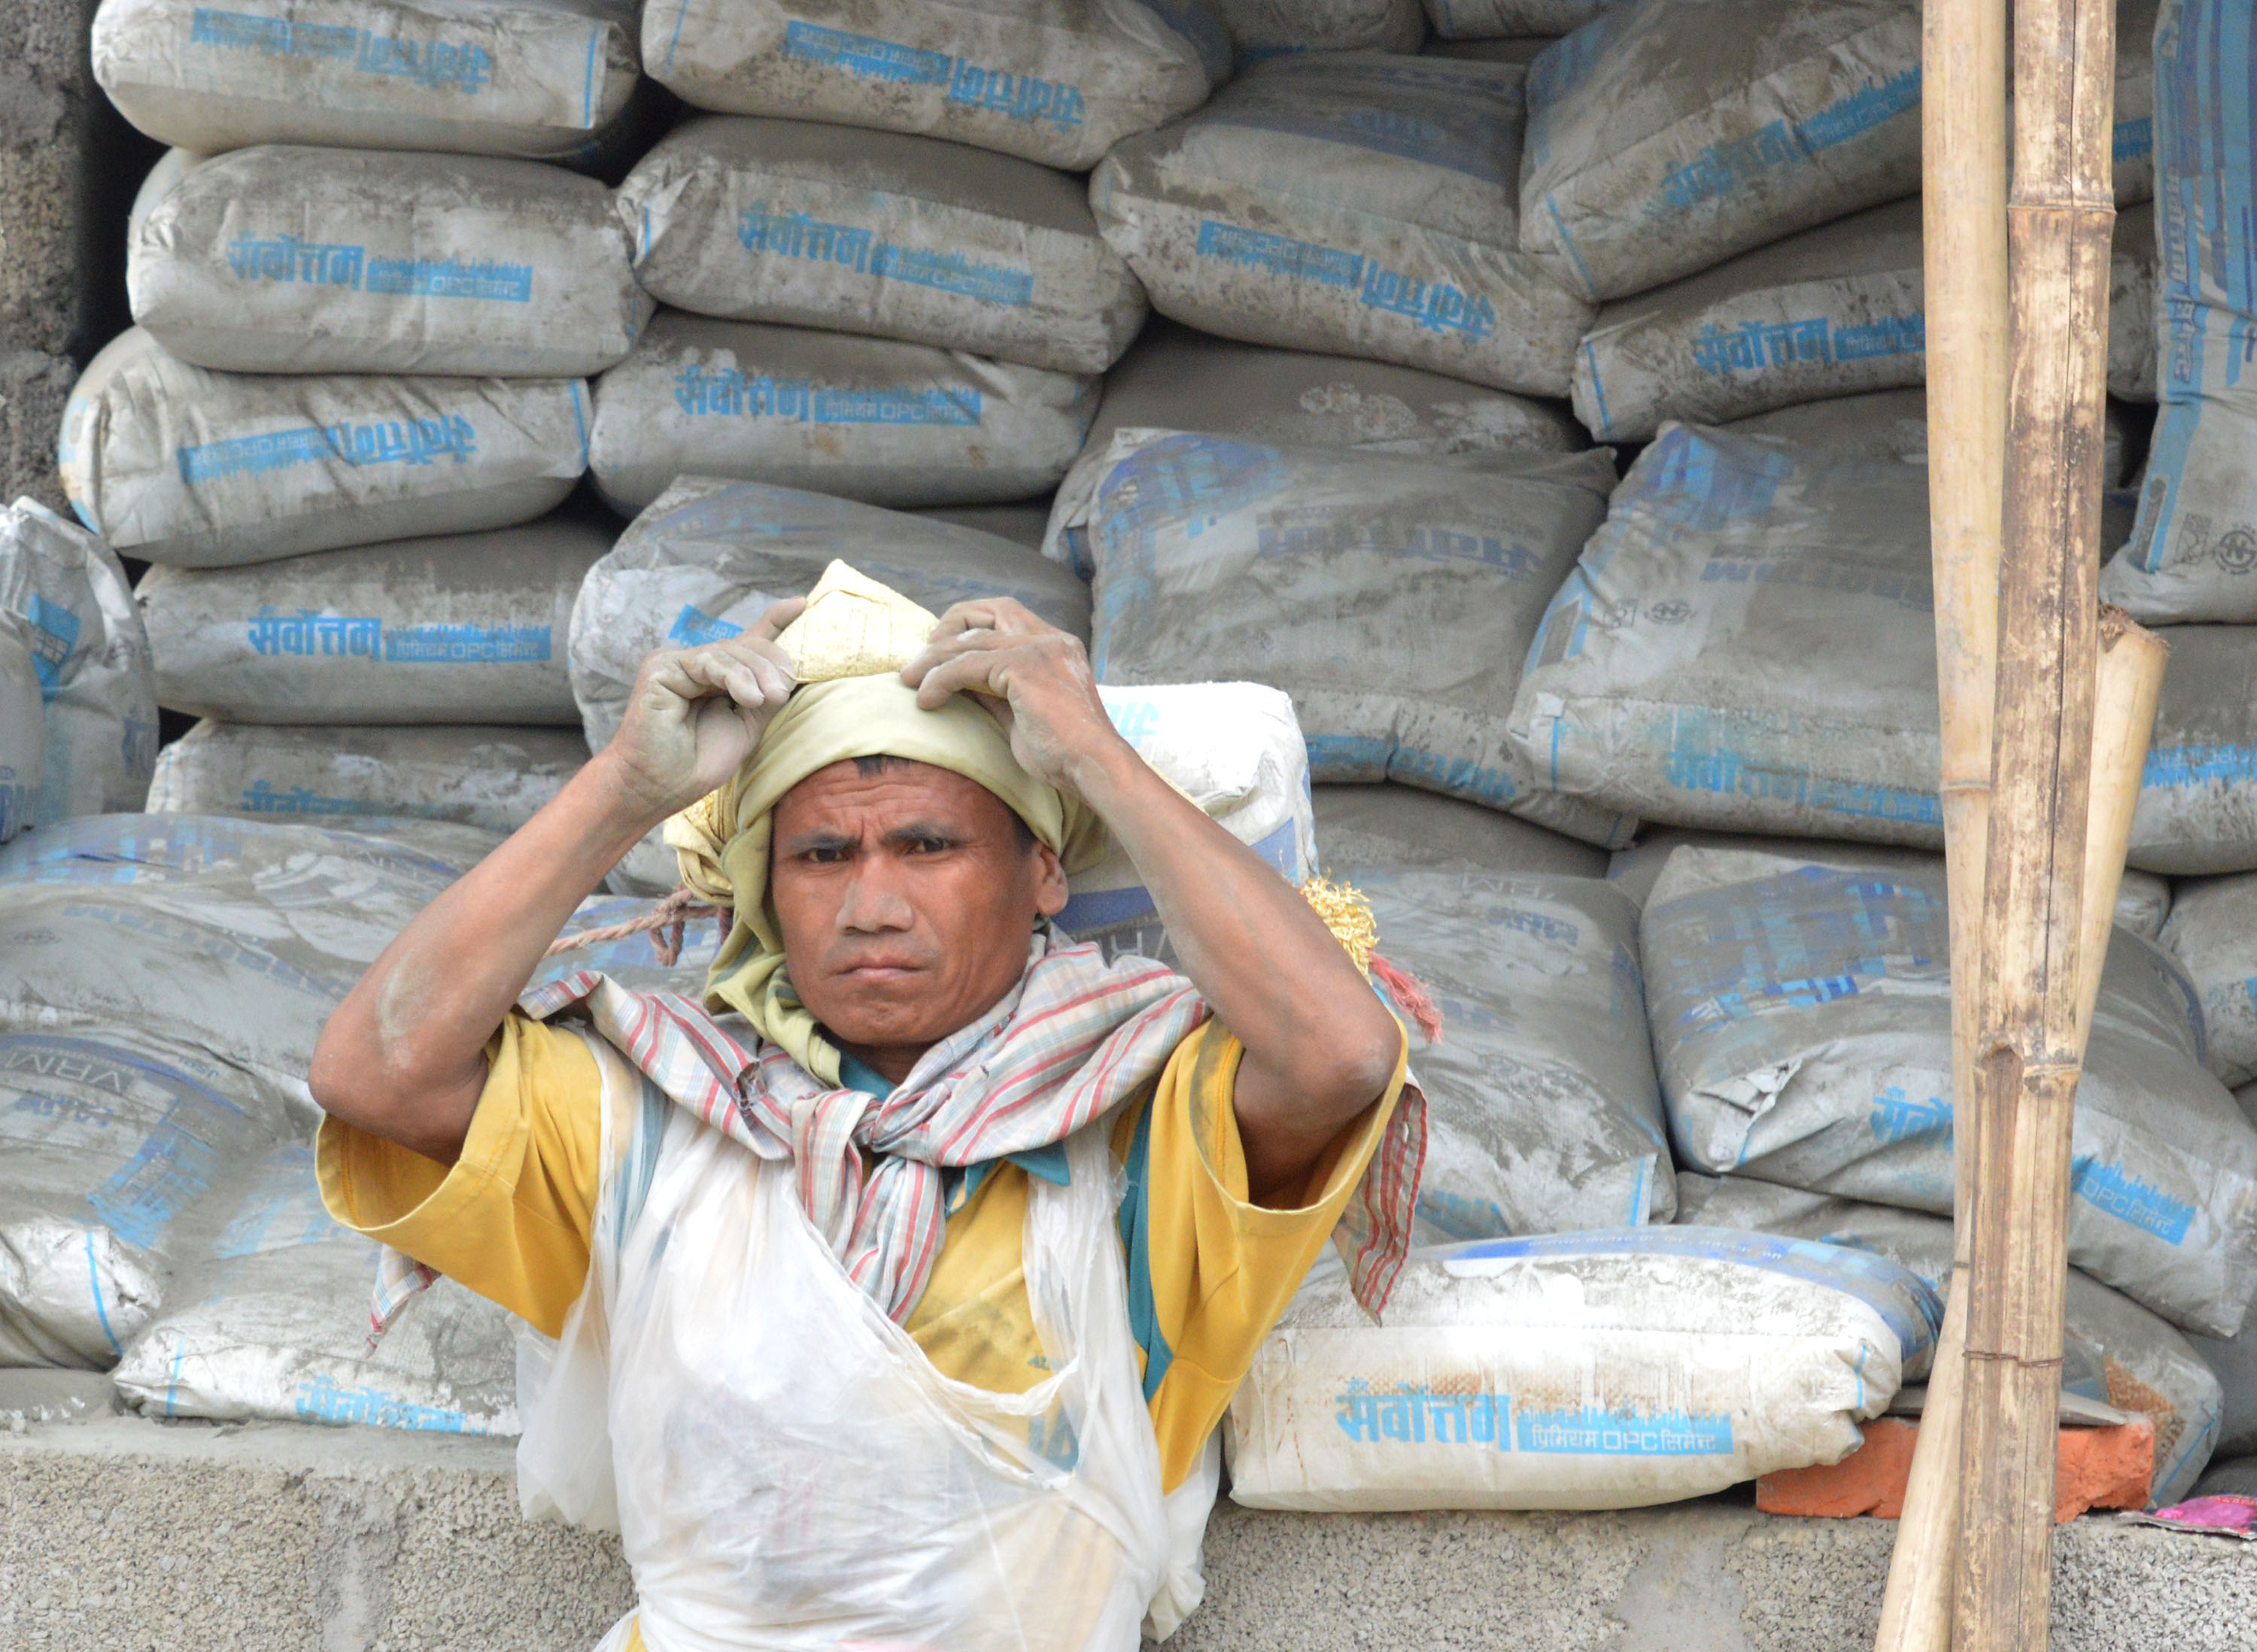 Government officials, experts argue over proposed cement standards